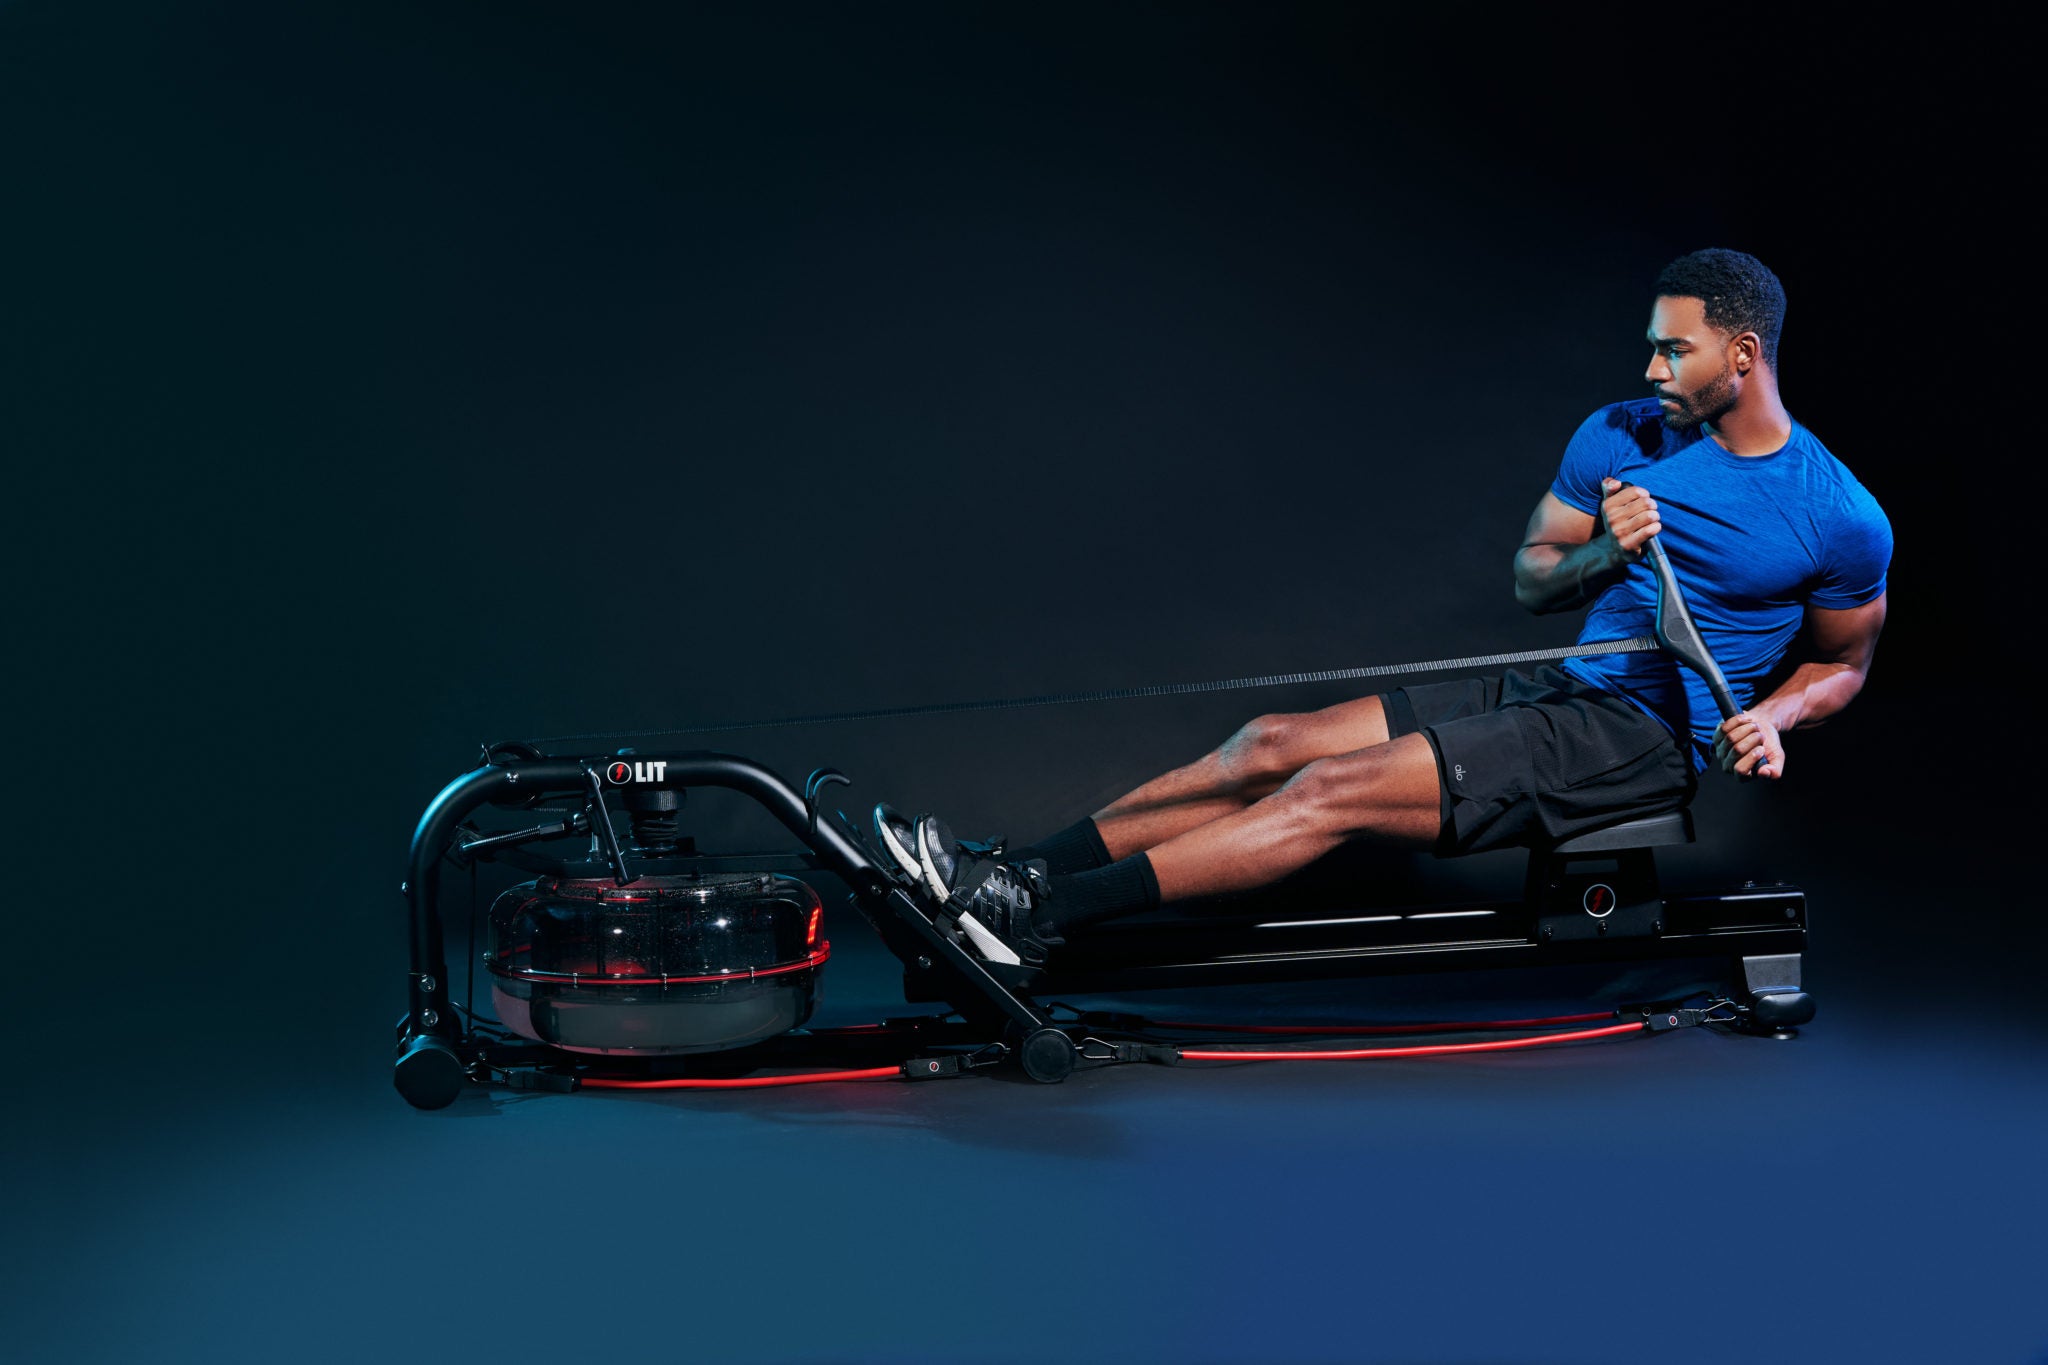 A man doing workout on the LIT Rowing Machine